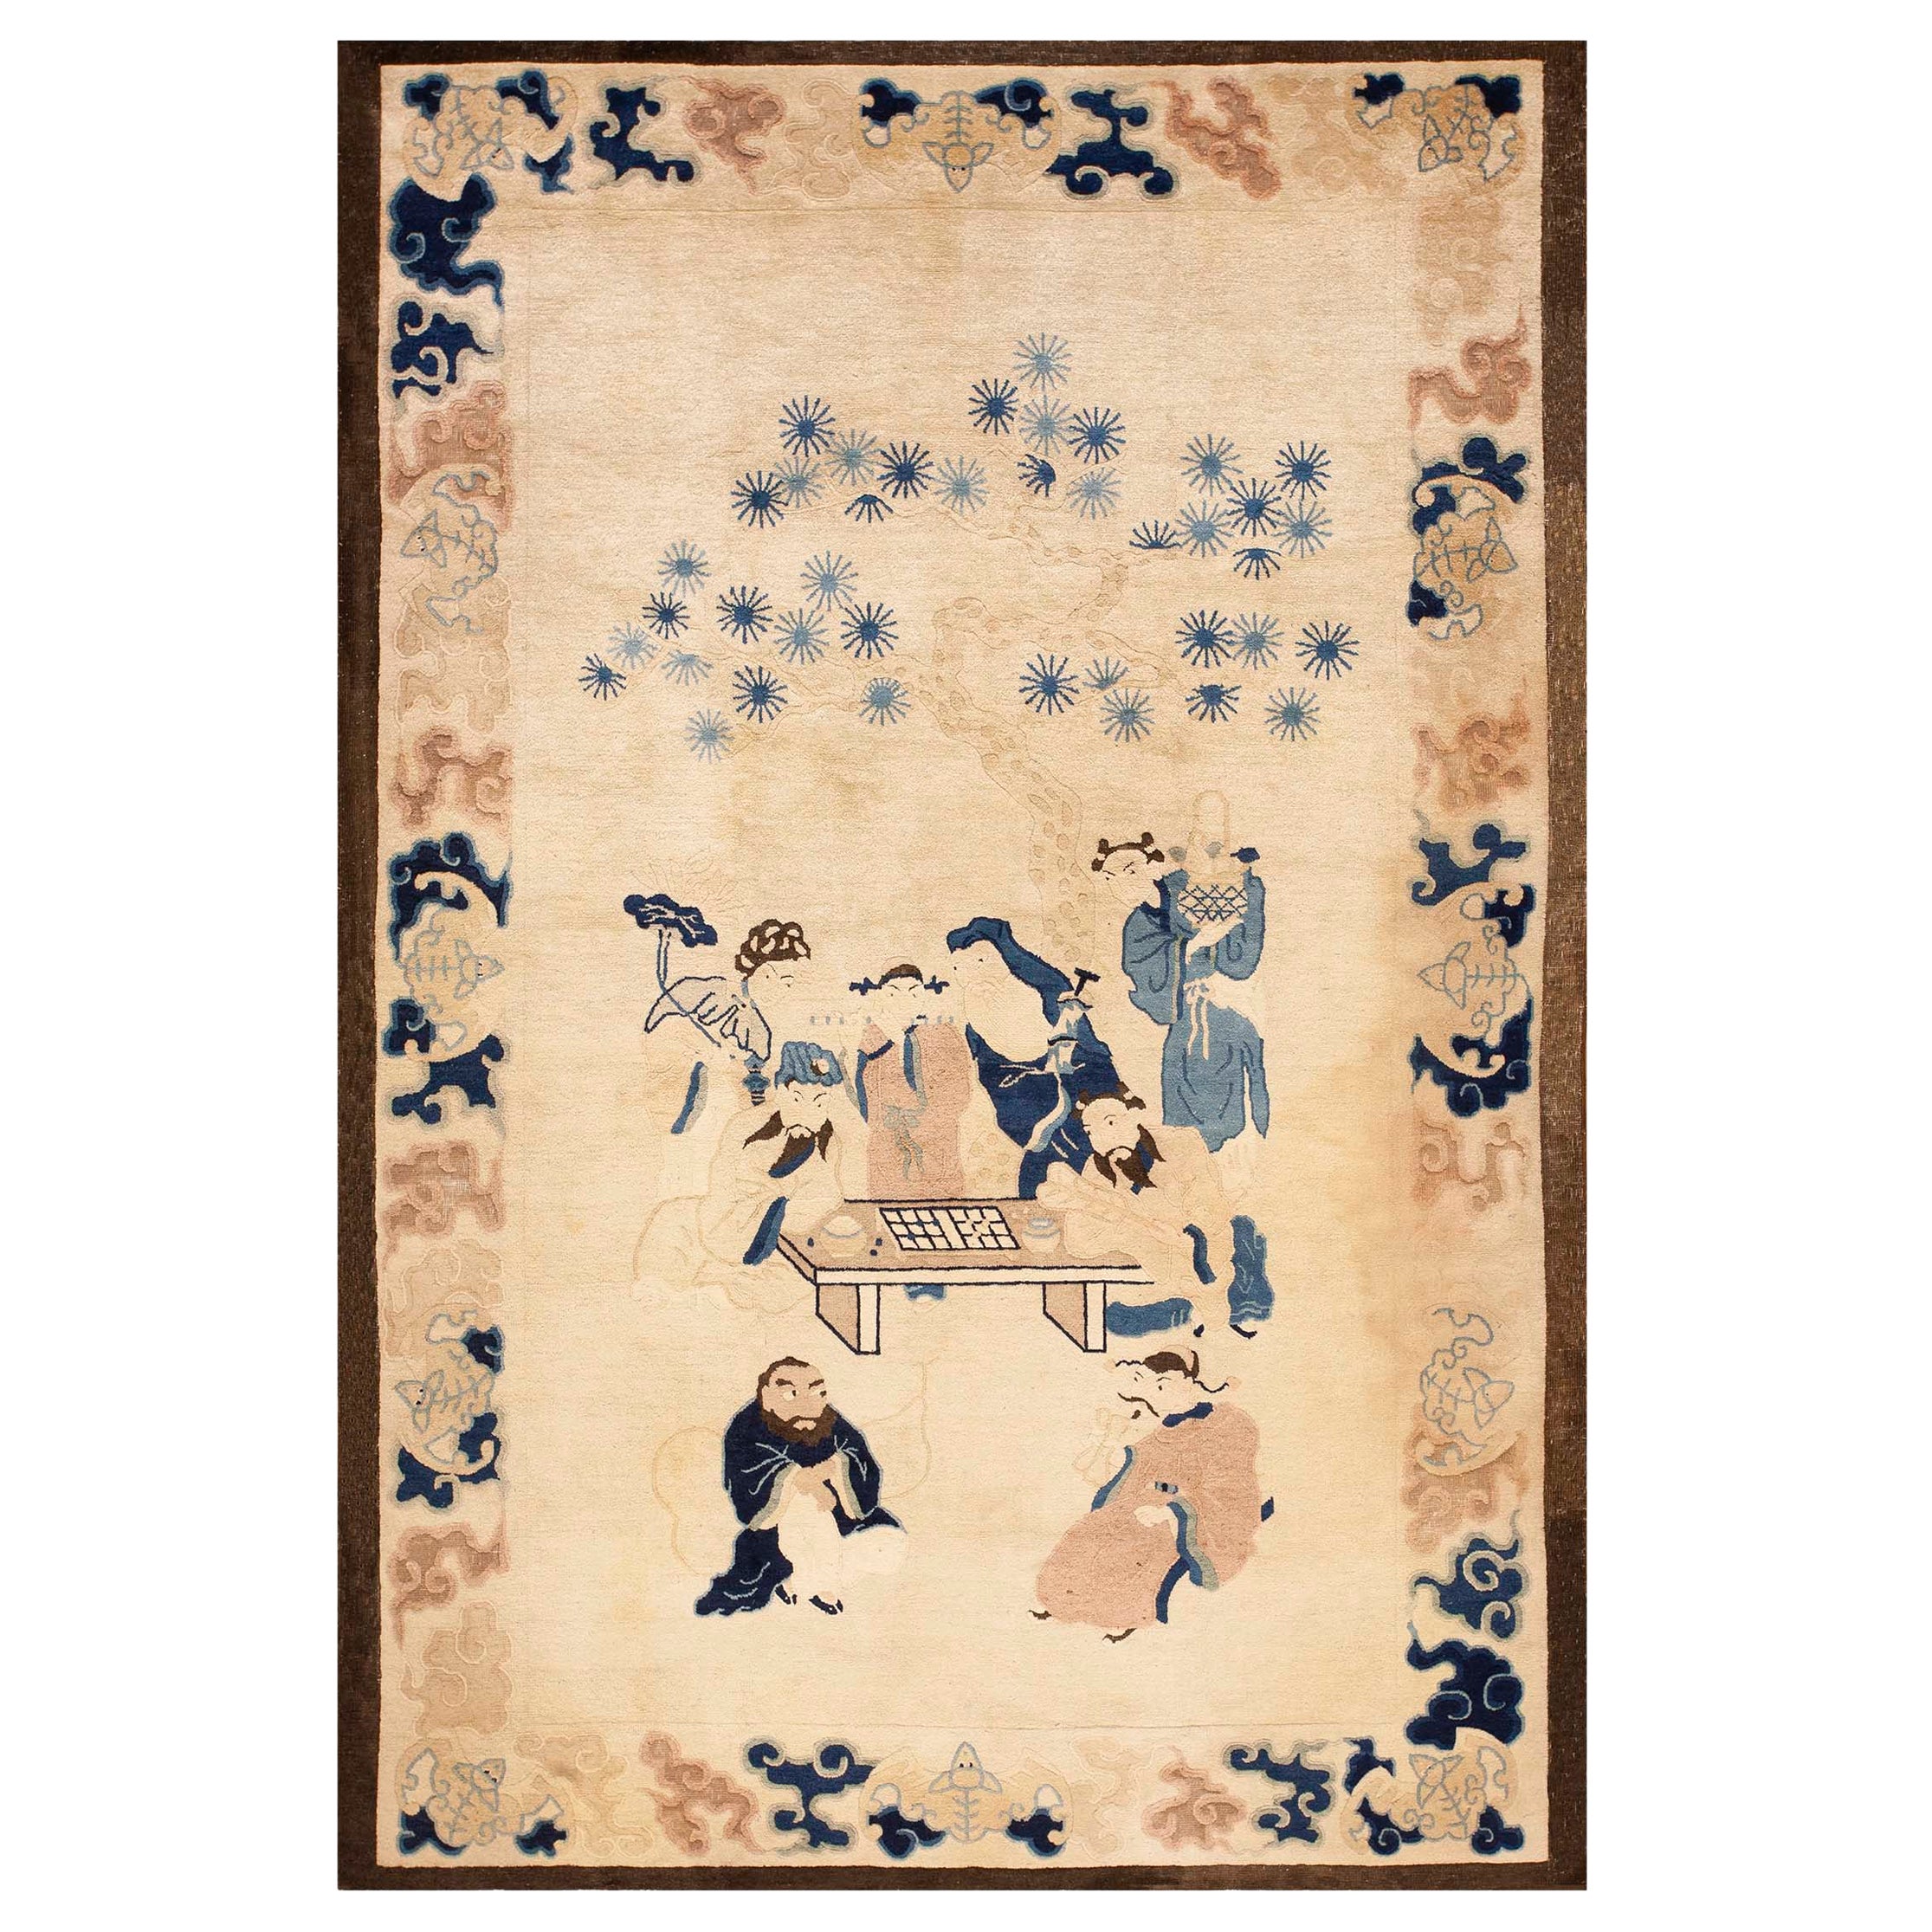 Early 20th Century Chinese Peking Carpet with Eight Immortals Playing Weiqi "Go"